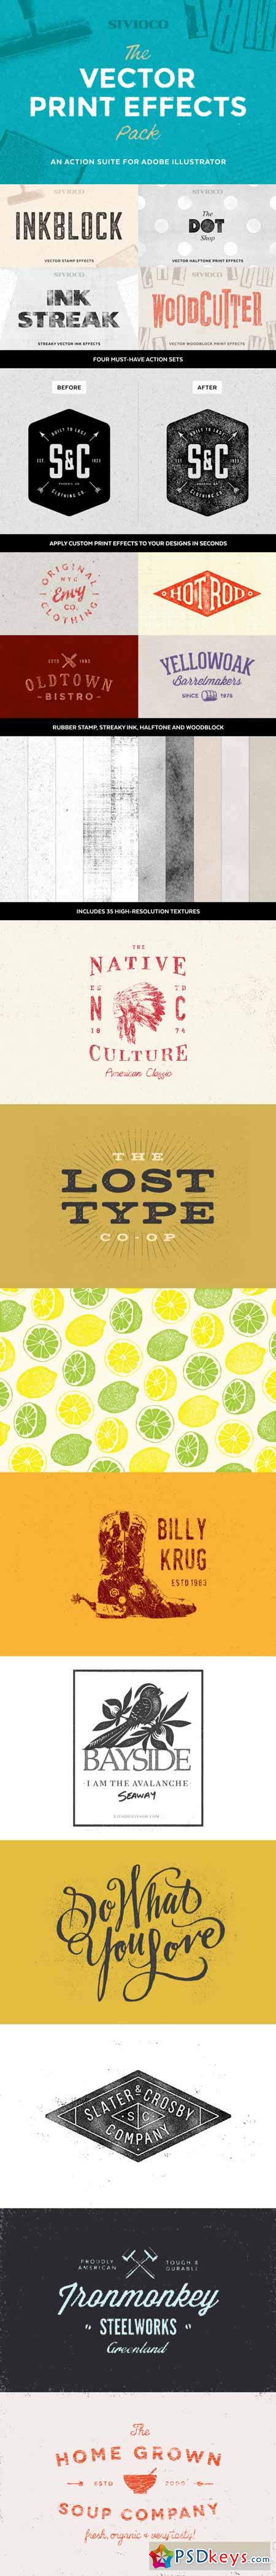 The Vector Print Effects Pack 333427